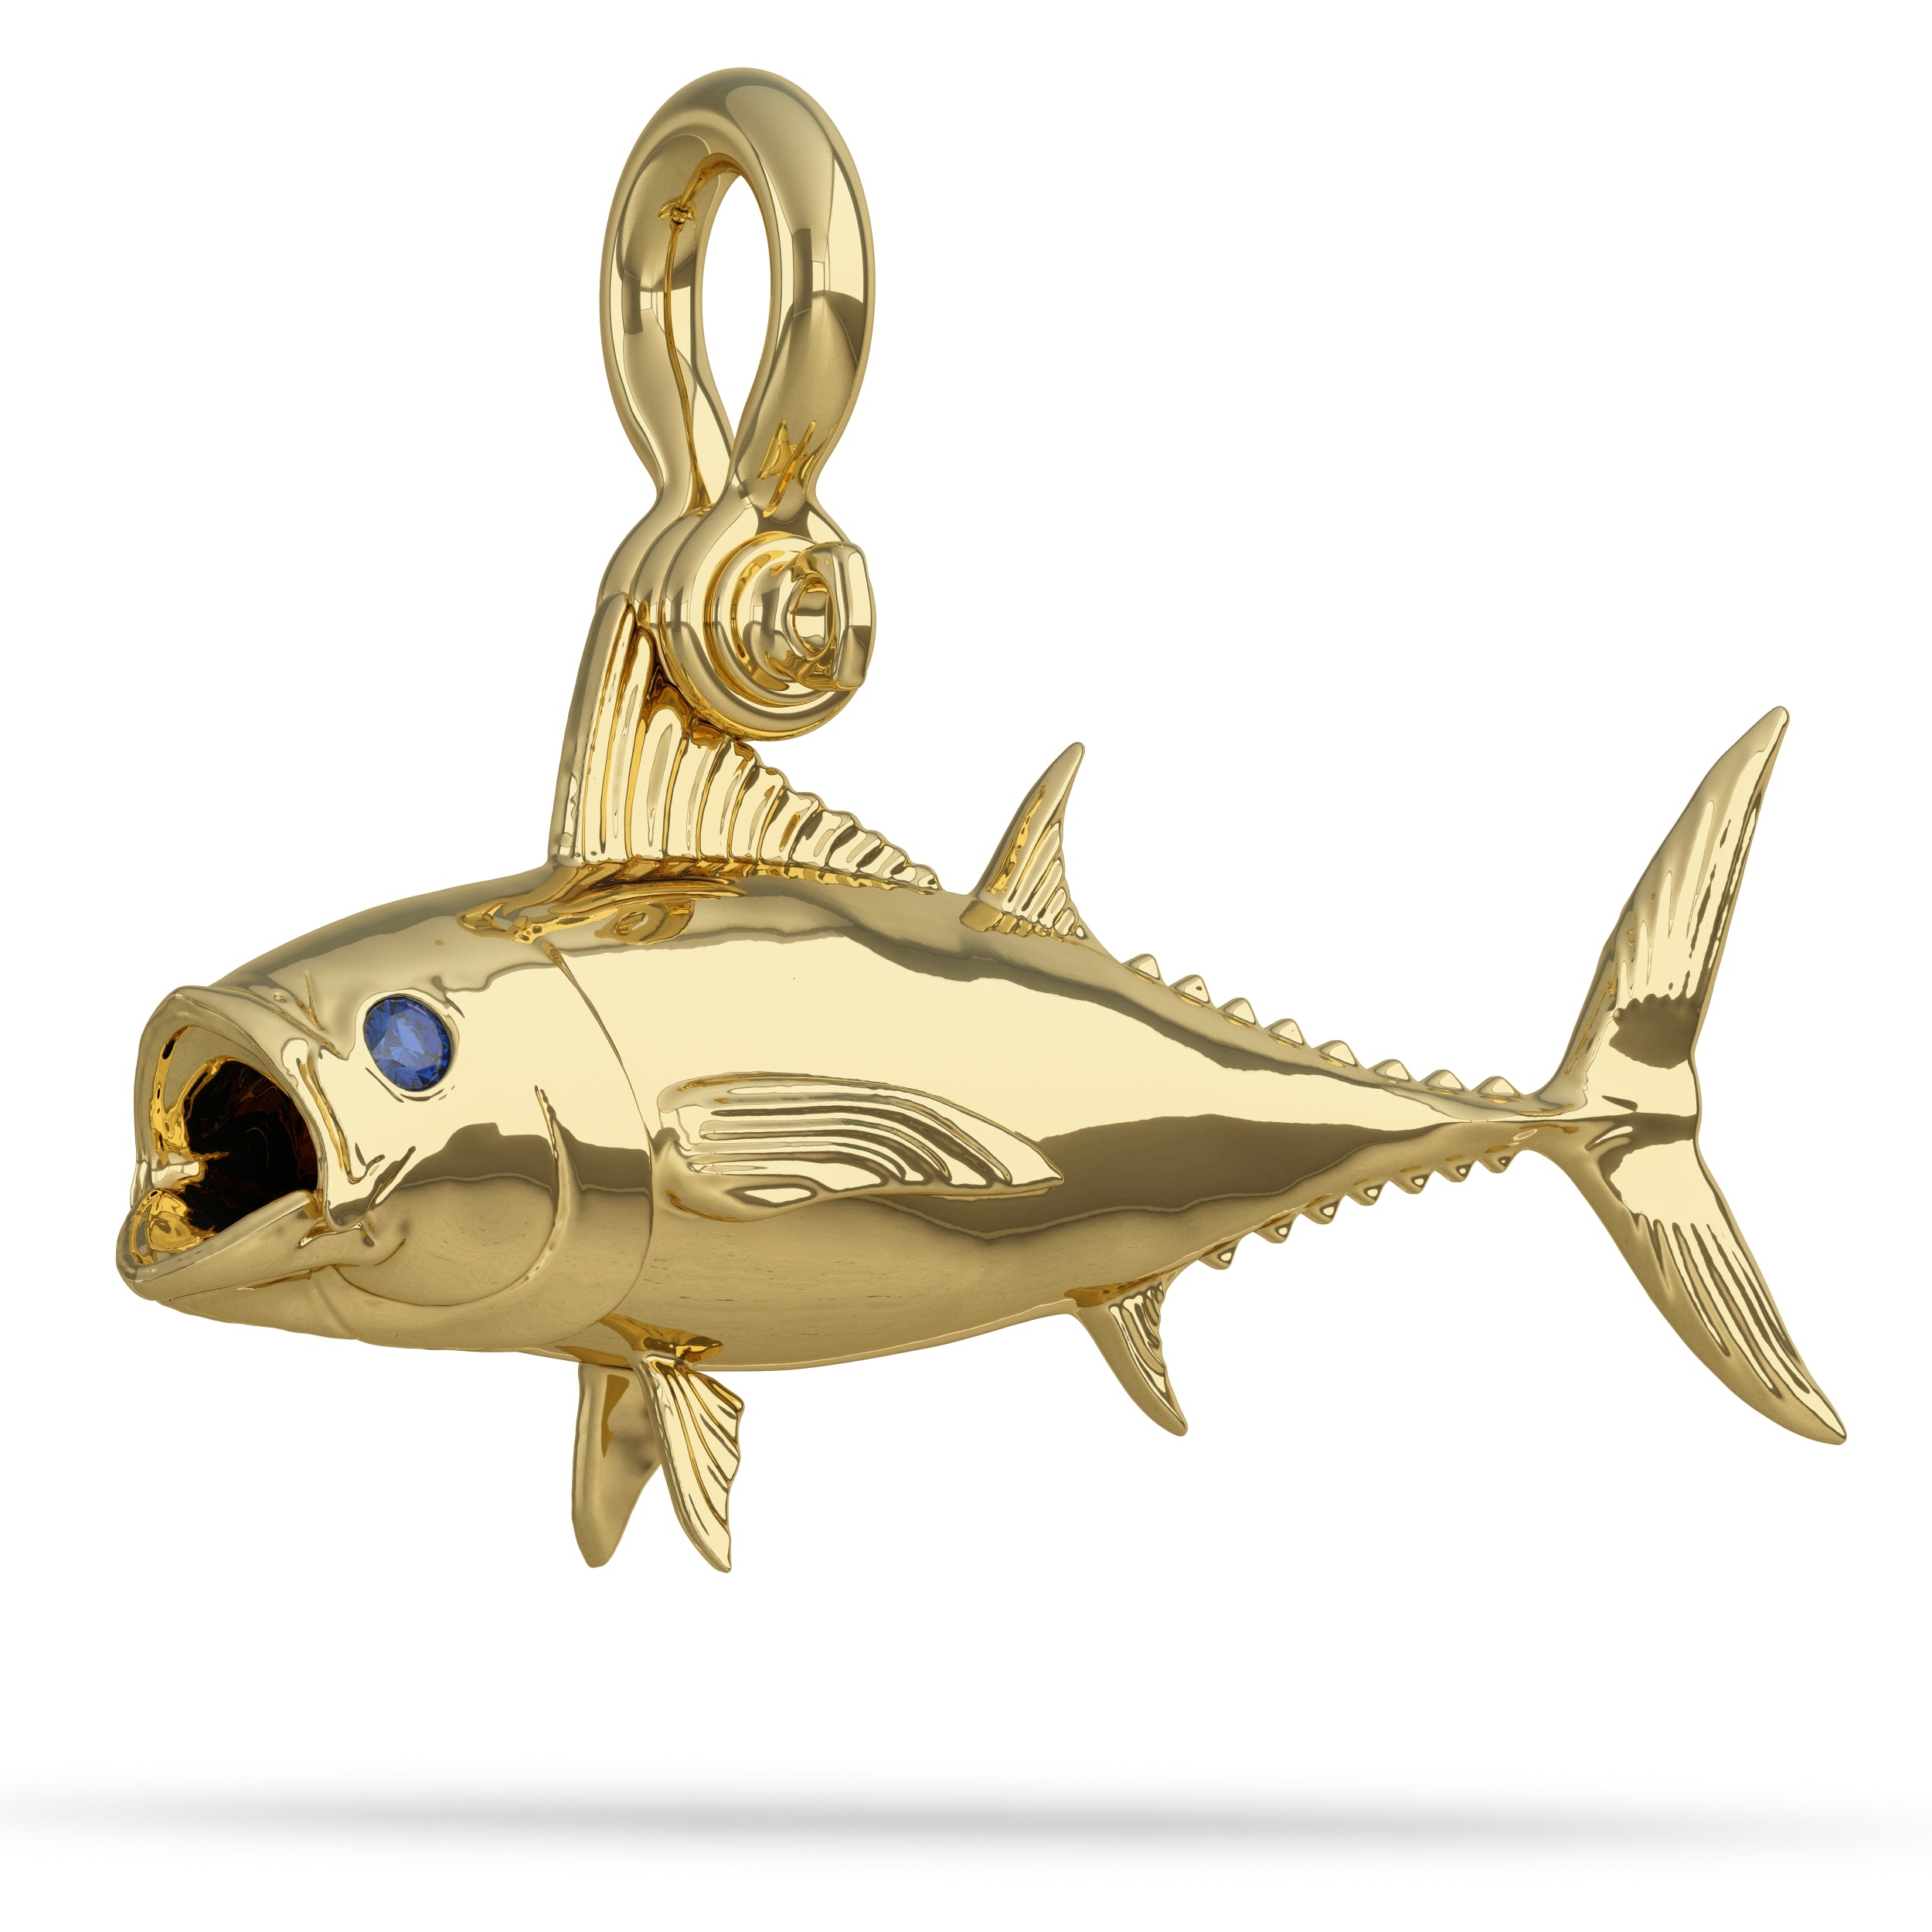 Solid 14k Gold Blackfin Tuna Pendant High Polished Mirror Finish With Blue Sapphire Eye with A Mariner Shackle Bail Custom Designed By Nautical Treasure Jewelry In The Florida Keys Caught on Bubbler C & H Lures